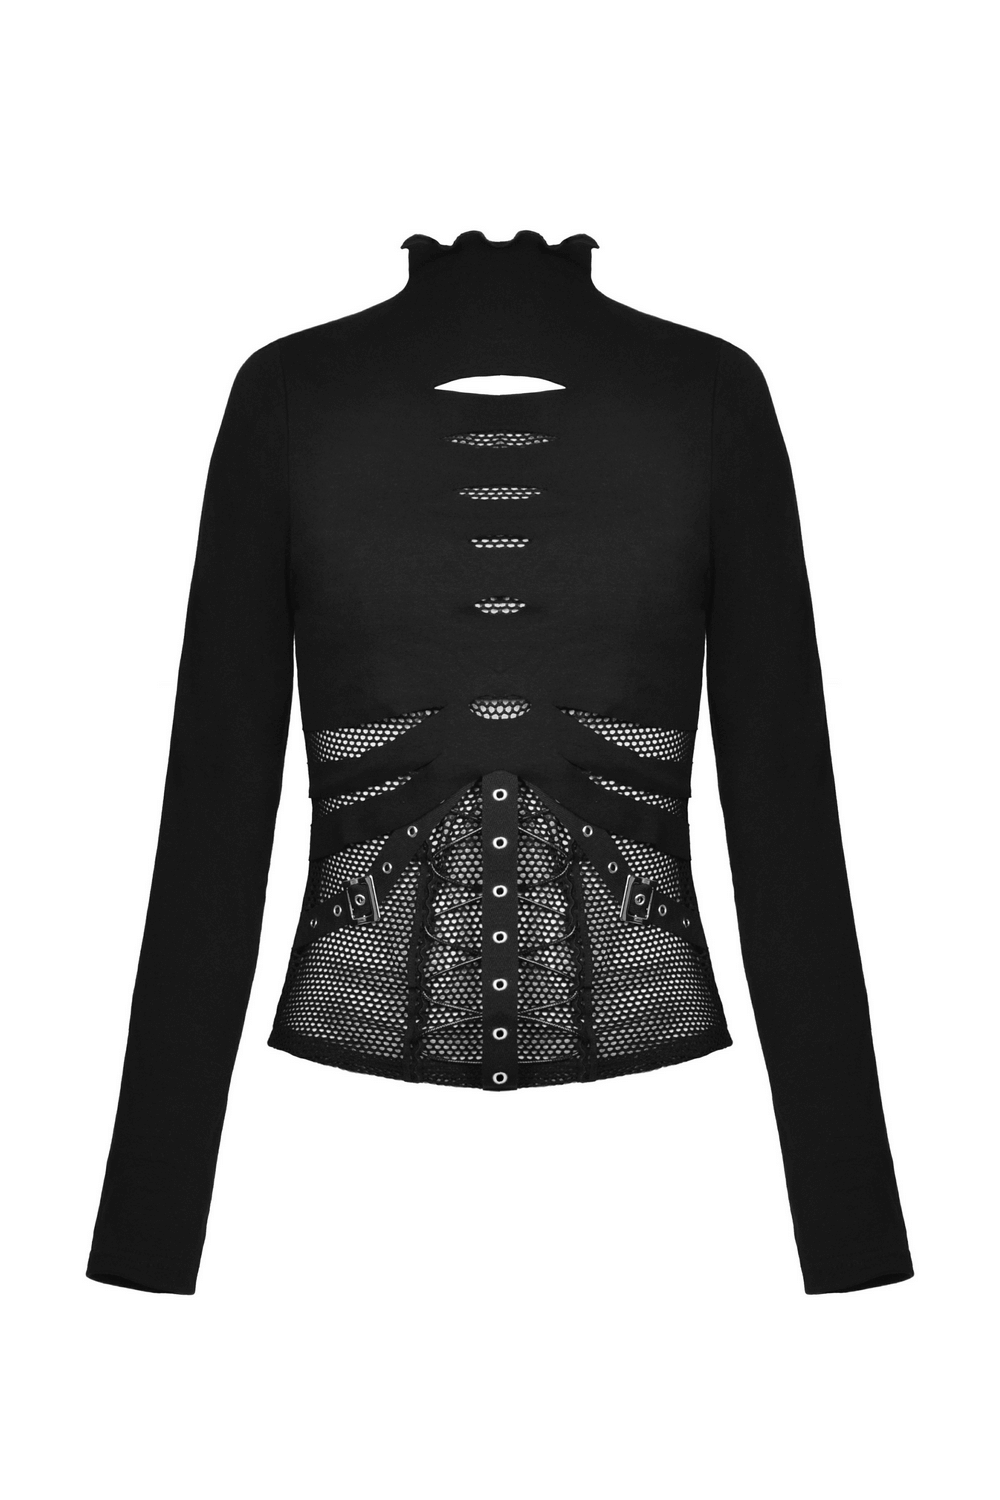 Sexy Fishnet Sweatshirt with Edgy Hardware Details